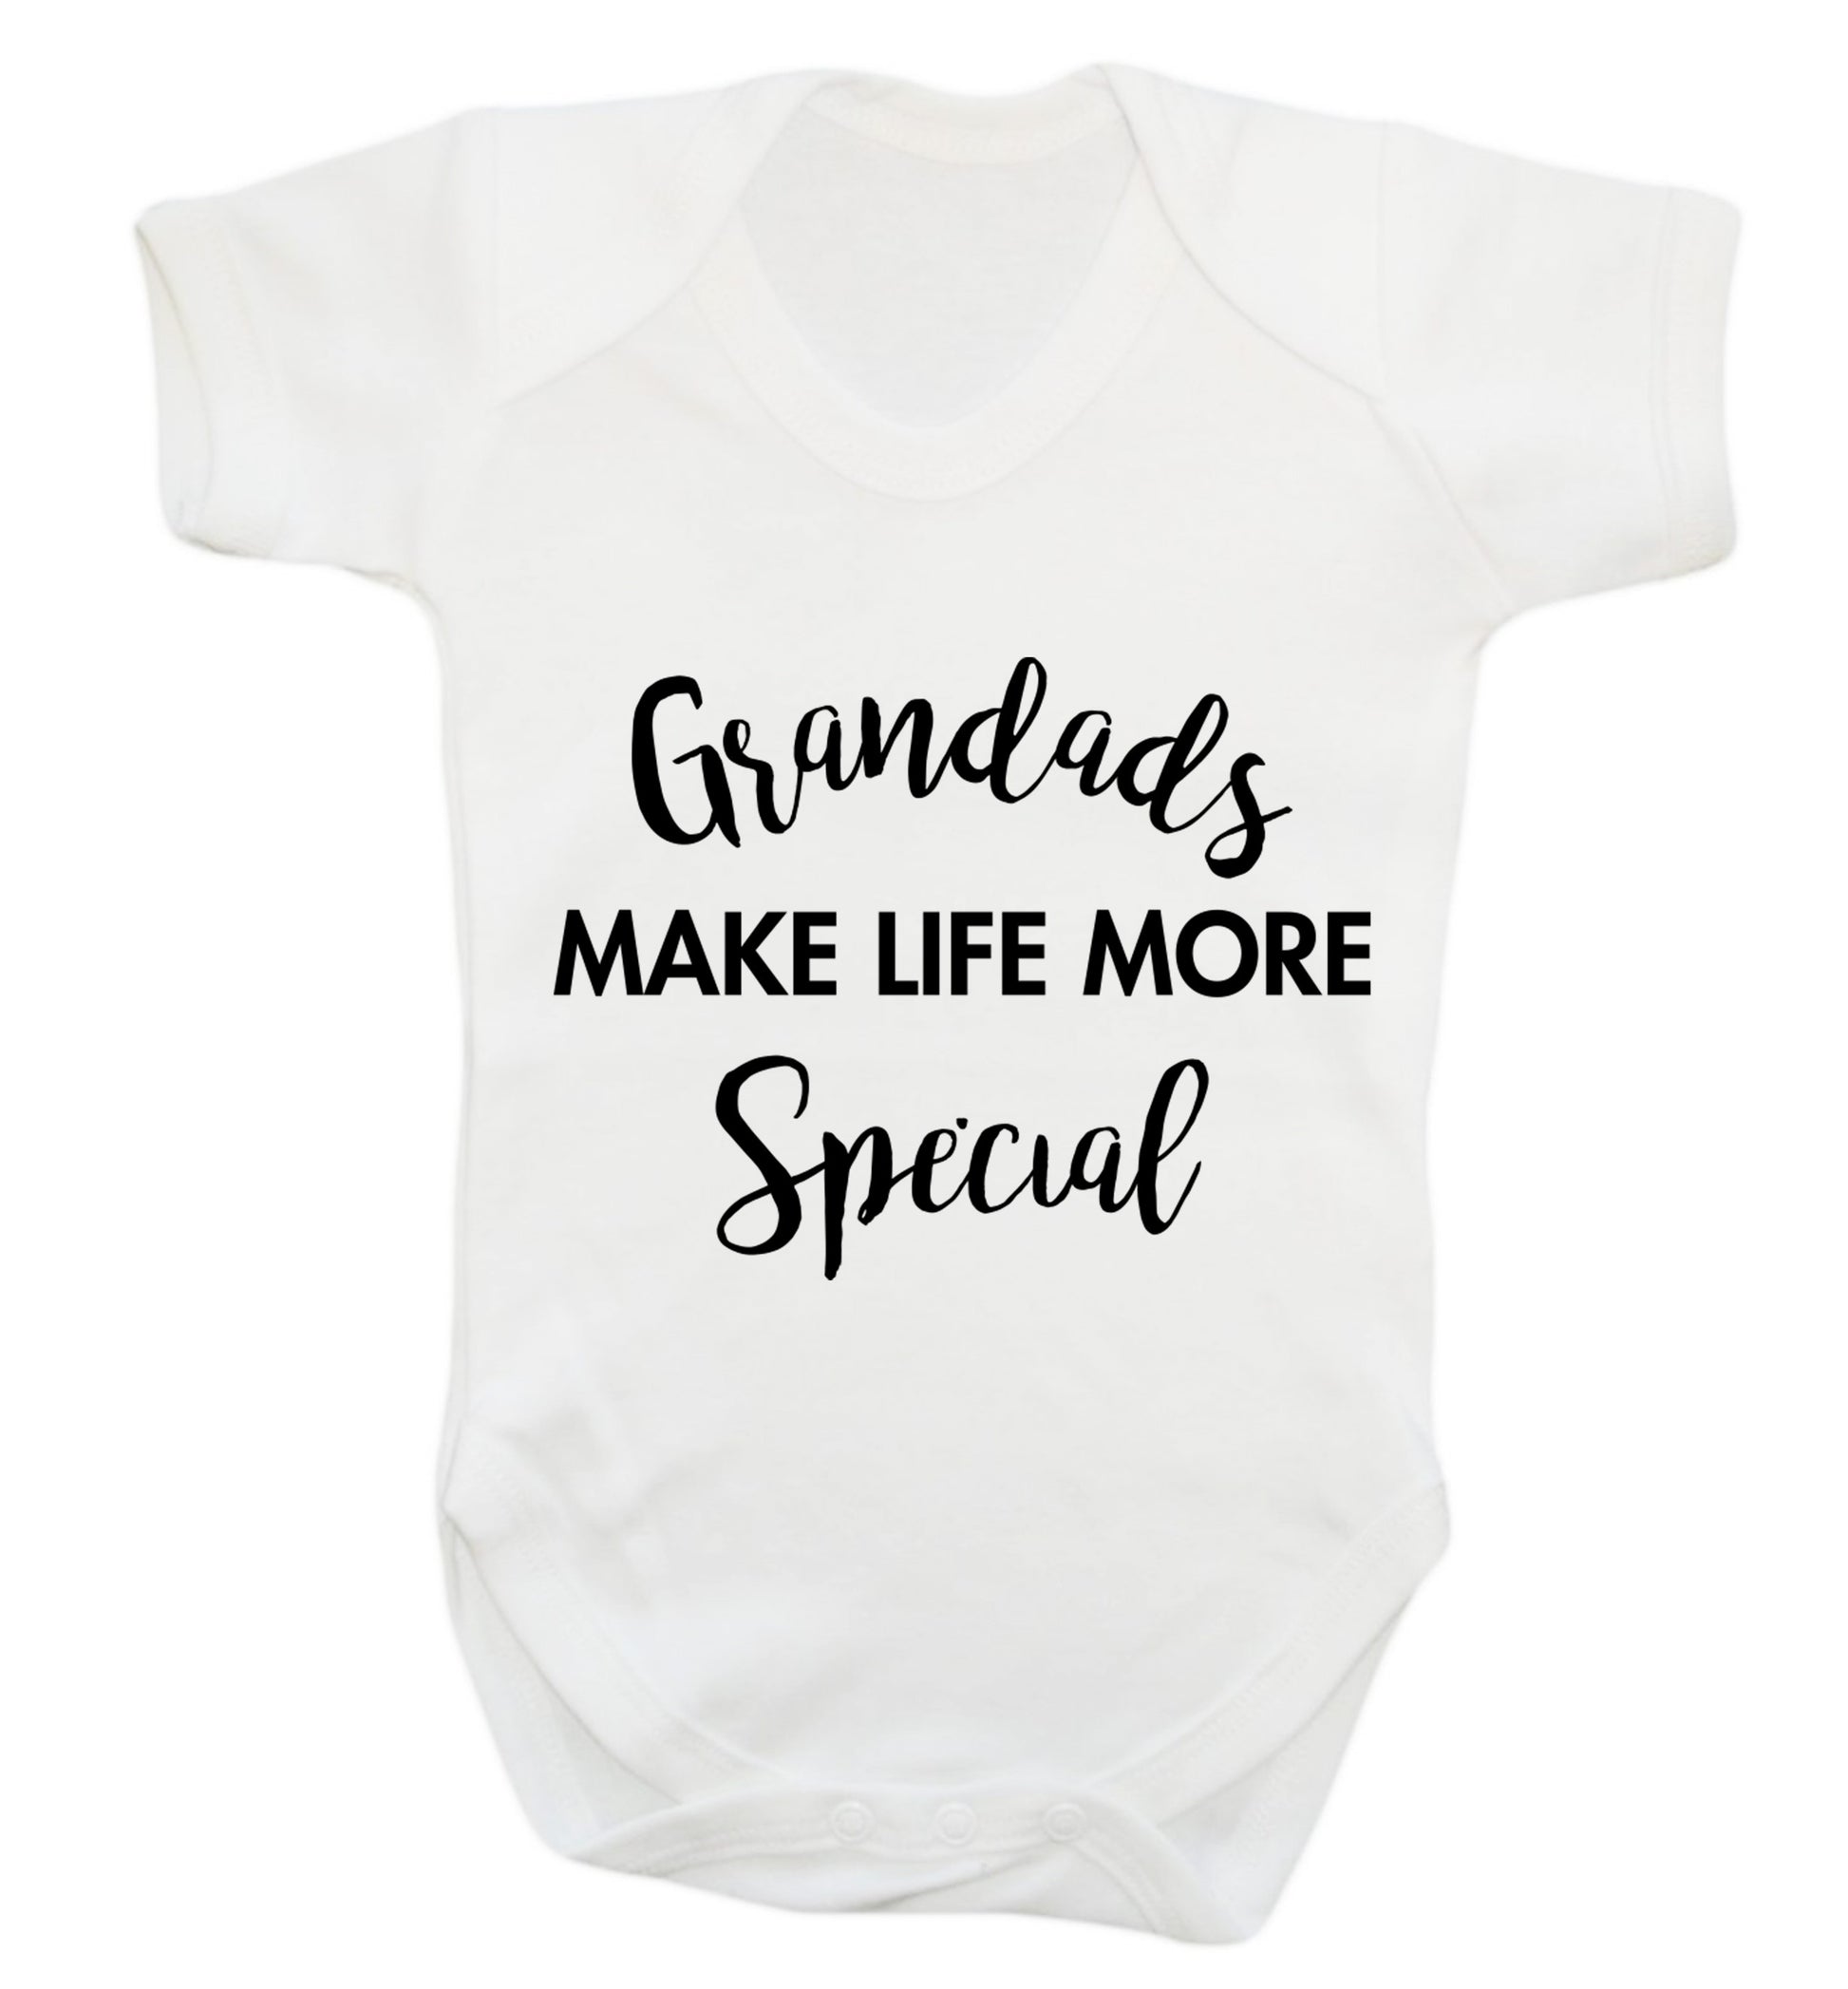 Grandads make life more special Baby Vest white 18-24 months